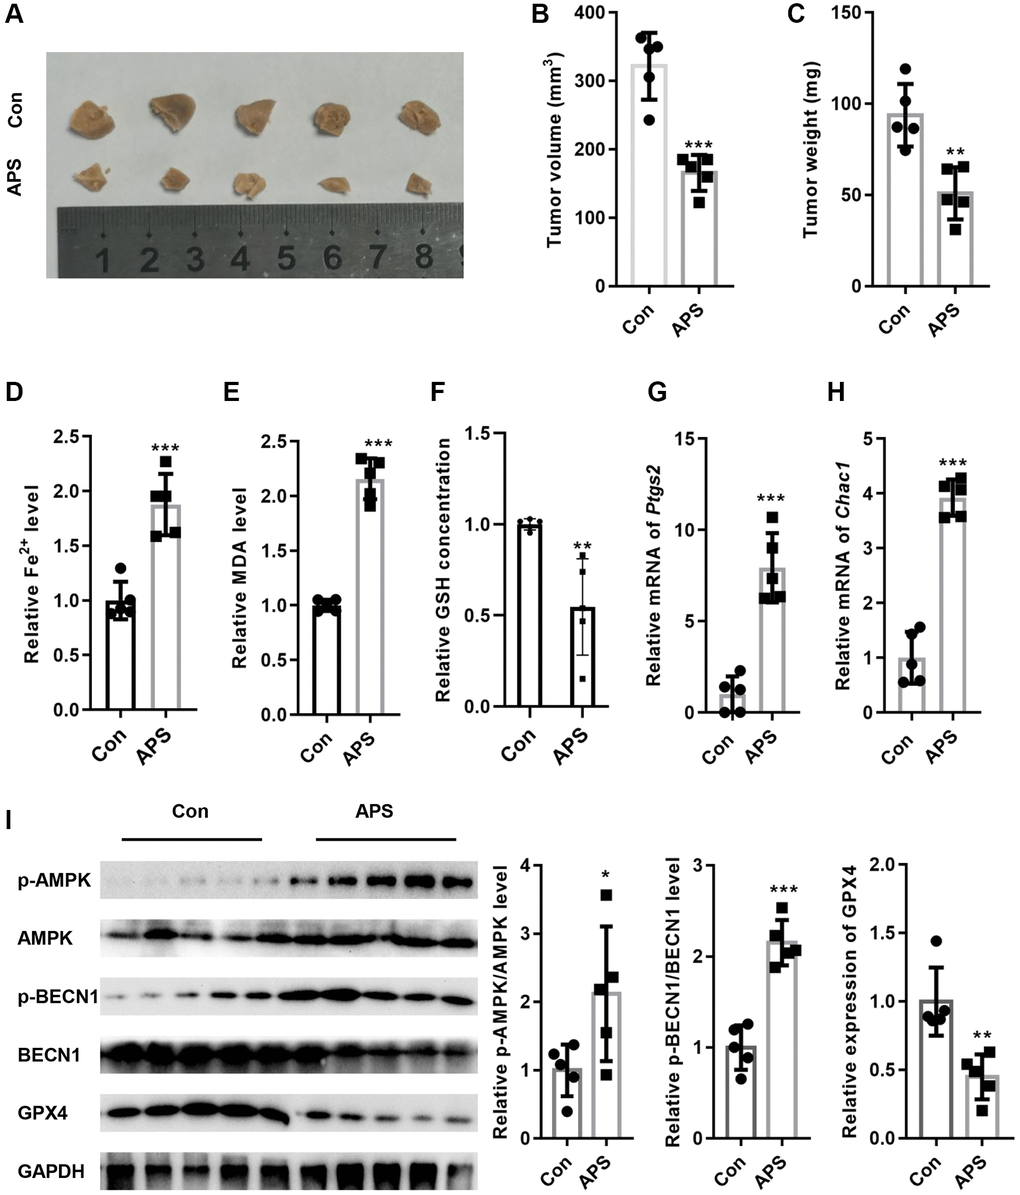 APS inhibited the growth of tumors in nude mice. (A) Representative images of tumor tissues from nude mice. APS significantly inhibited tumor volume (B) and weight (C) in nude mice. APS increased the levels of Fe2+ (D) and MDA (E) in tumor tissues. (F) APS decreased GSH levels in tumor tissues. The RT-PCR results showed that APS increased the mRNA levels of ptgs2 (G) and Chac1 (H) in tumor tissues. (I) After APS treatment, the phosphorylation levels of AMPK and BECN1 were increased in the tumor tissues of nude mice. *p **p ***p 